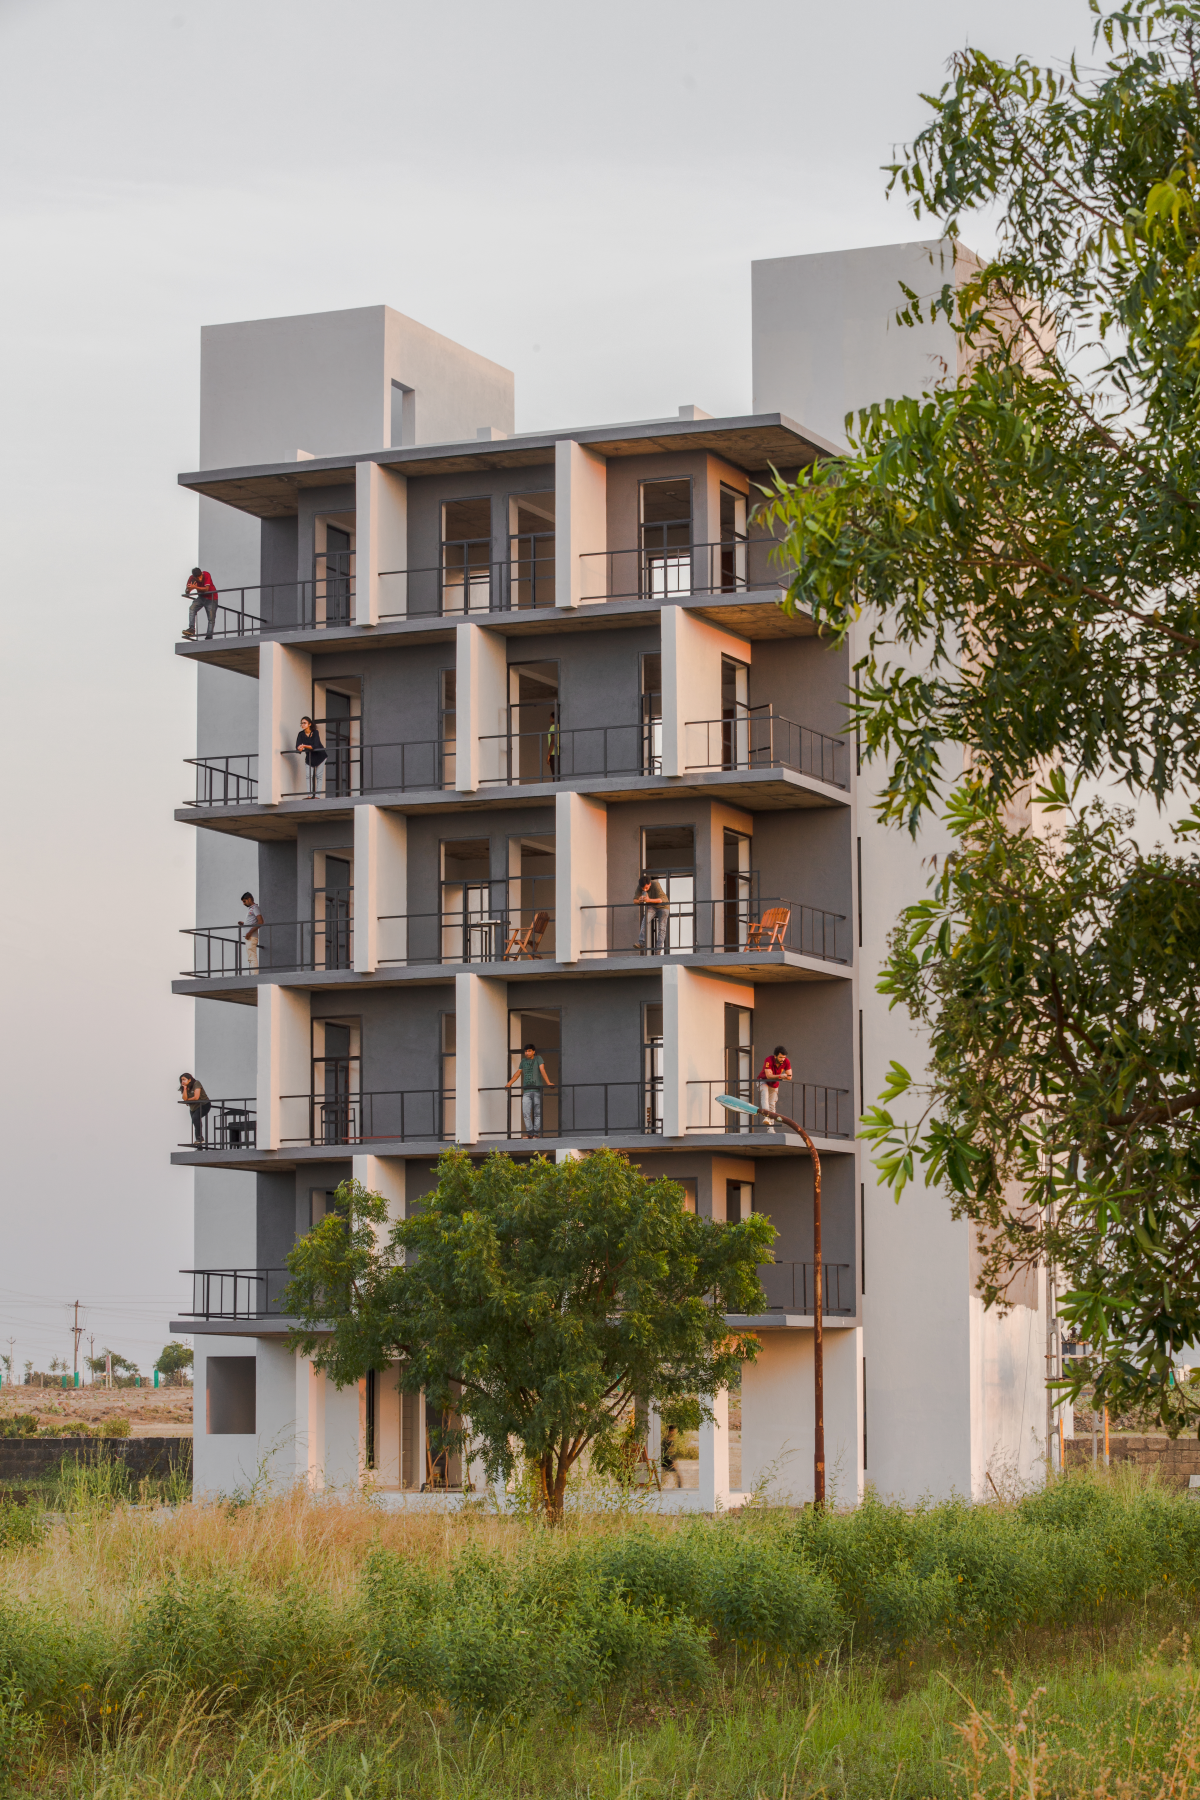 The Flying Walls Hostel, at Rajkot, Gujarat, by Dhulia Architecture Design Studio 26